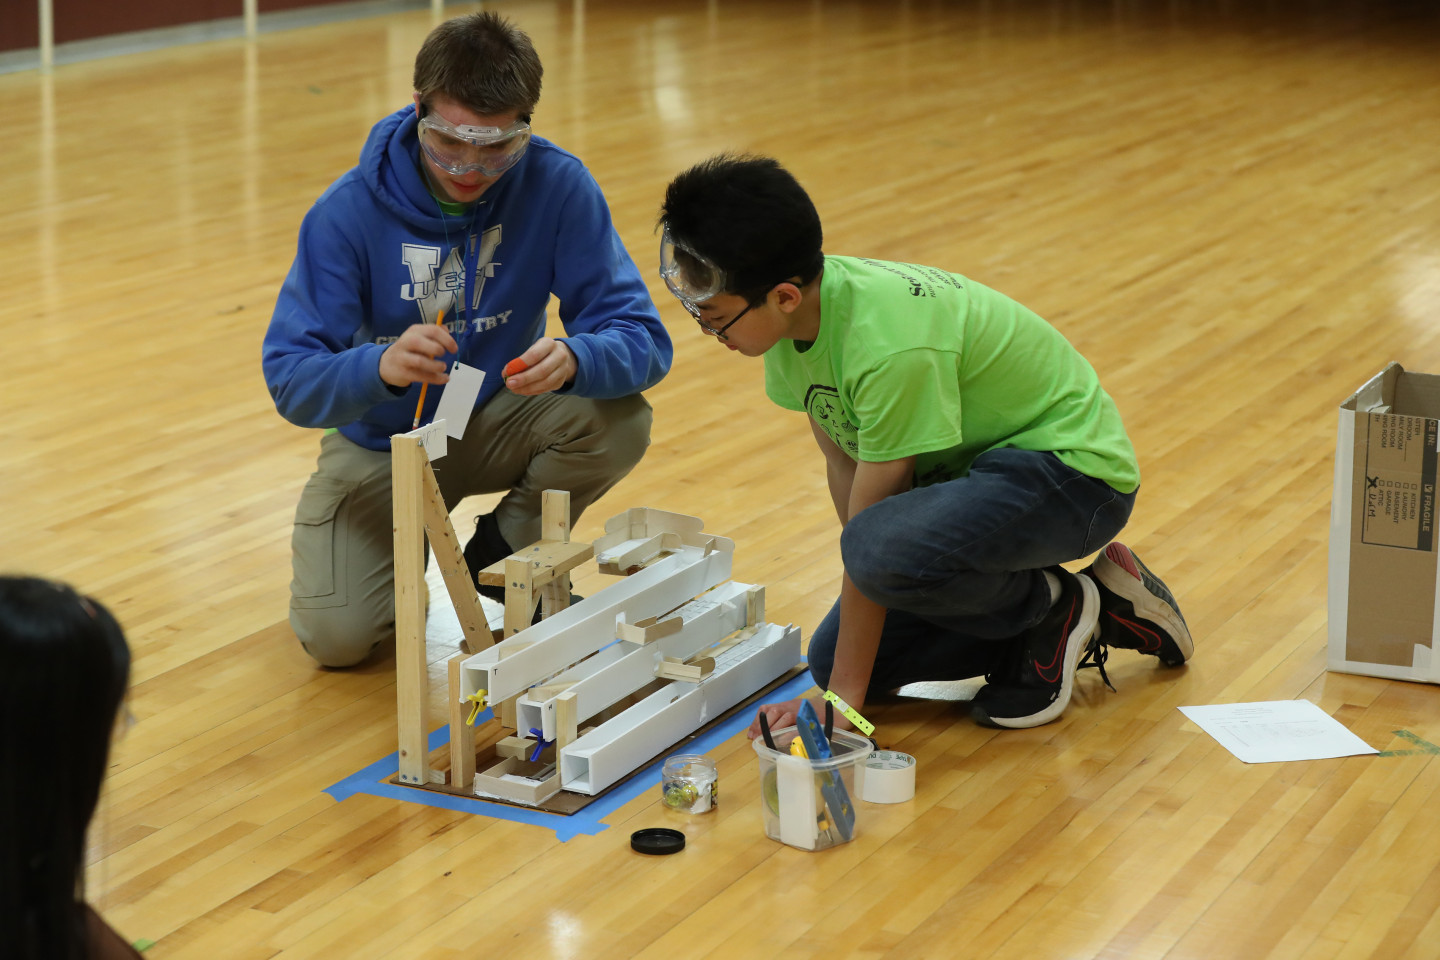 A WMU student assists a participant in the Regional Science Olympiad event held at WMU.